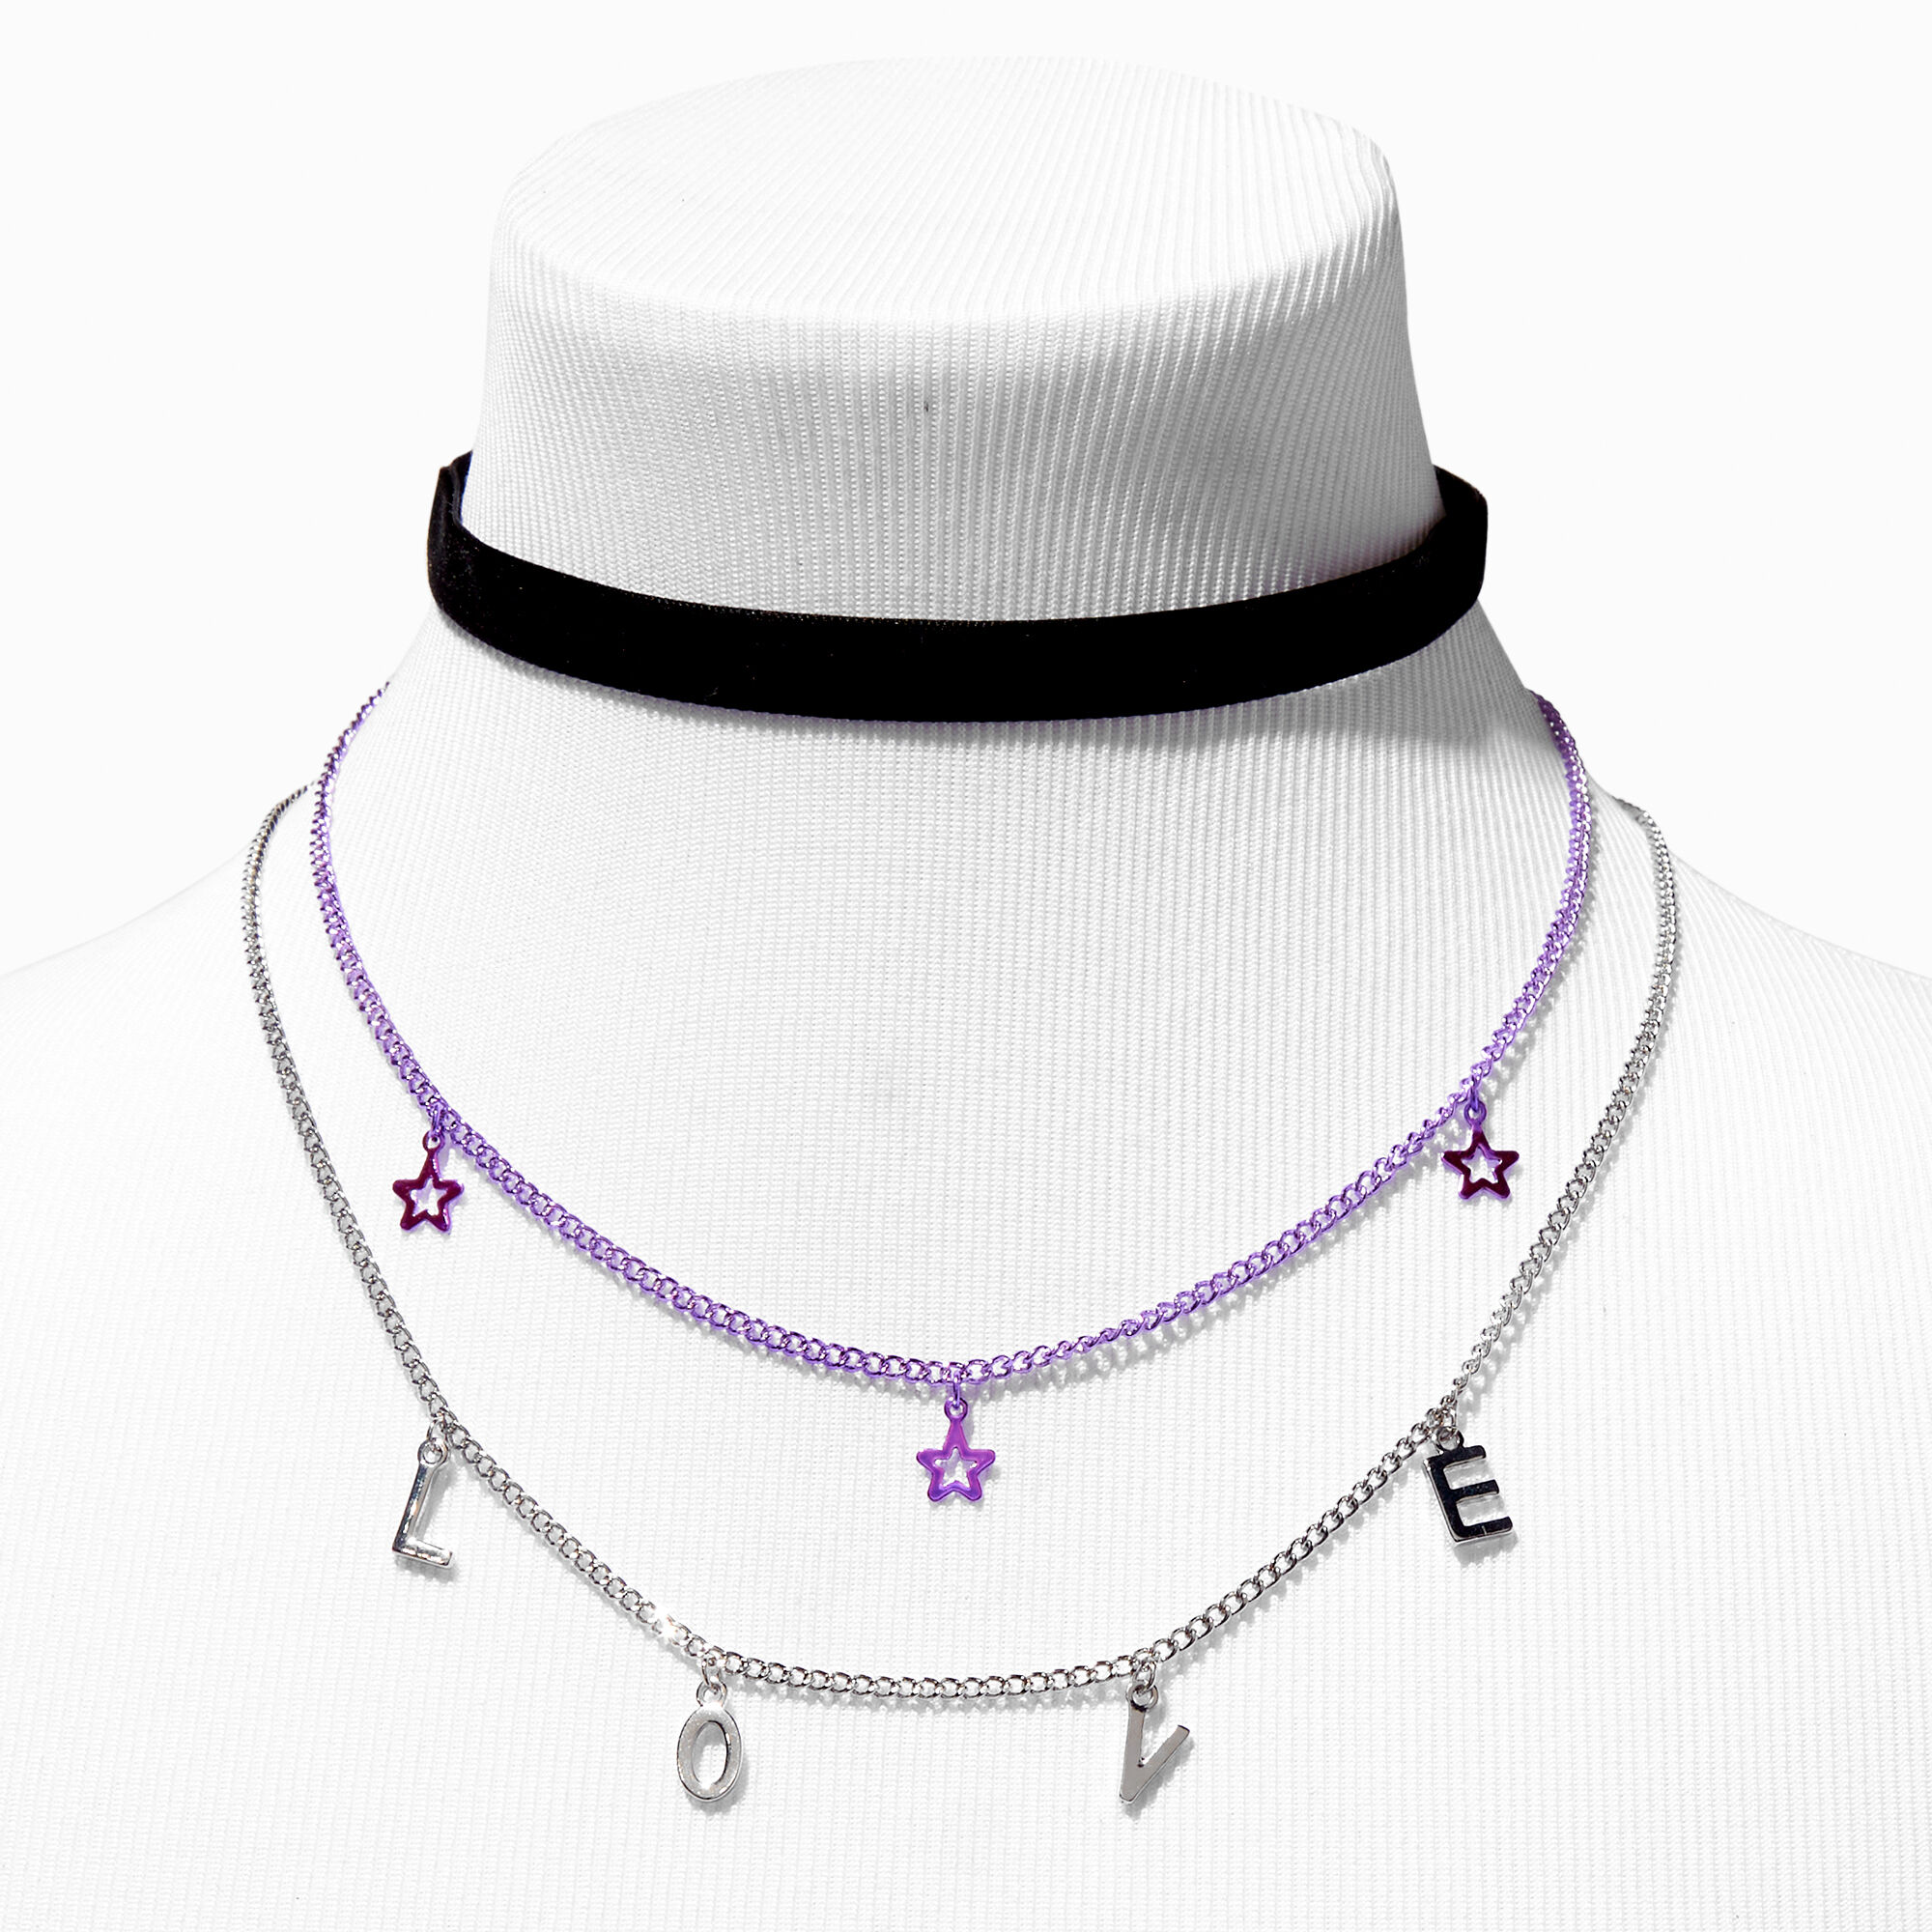 View Claires Club Love Star Multi Strand Choker 3 Pack Purple information